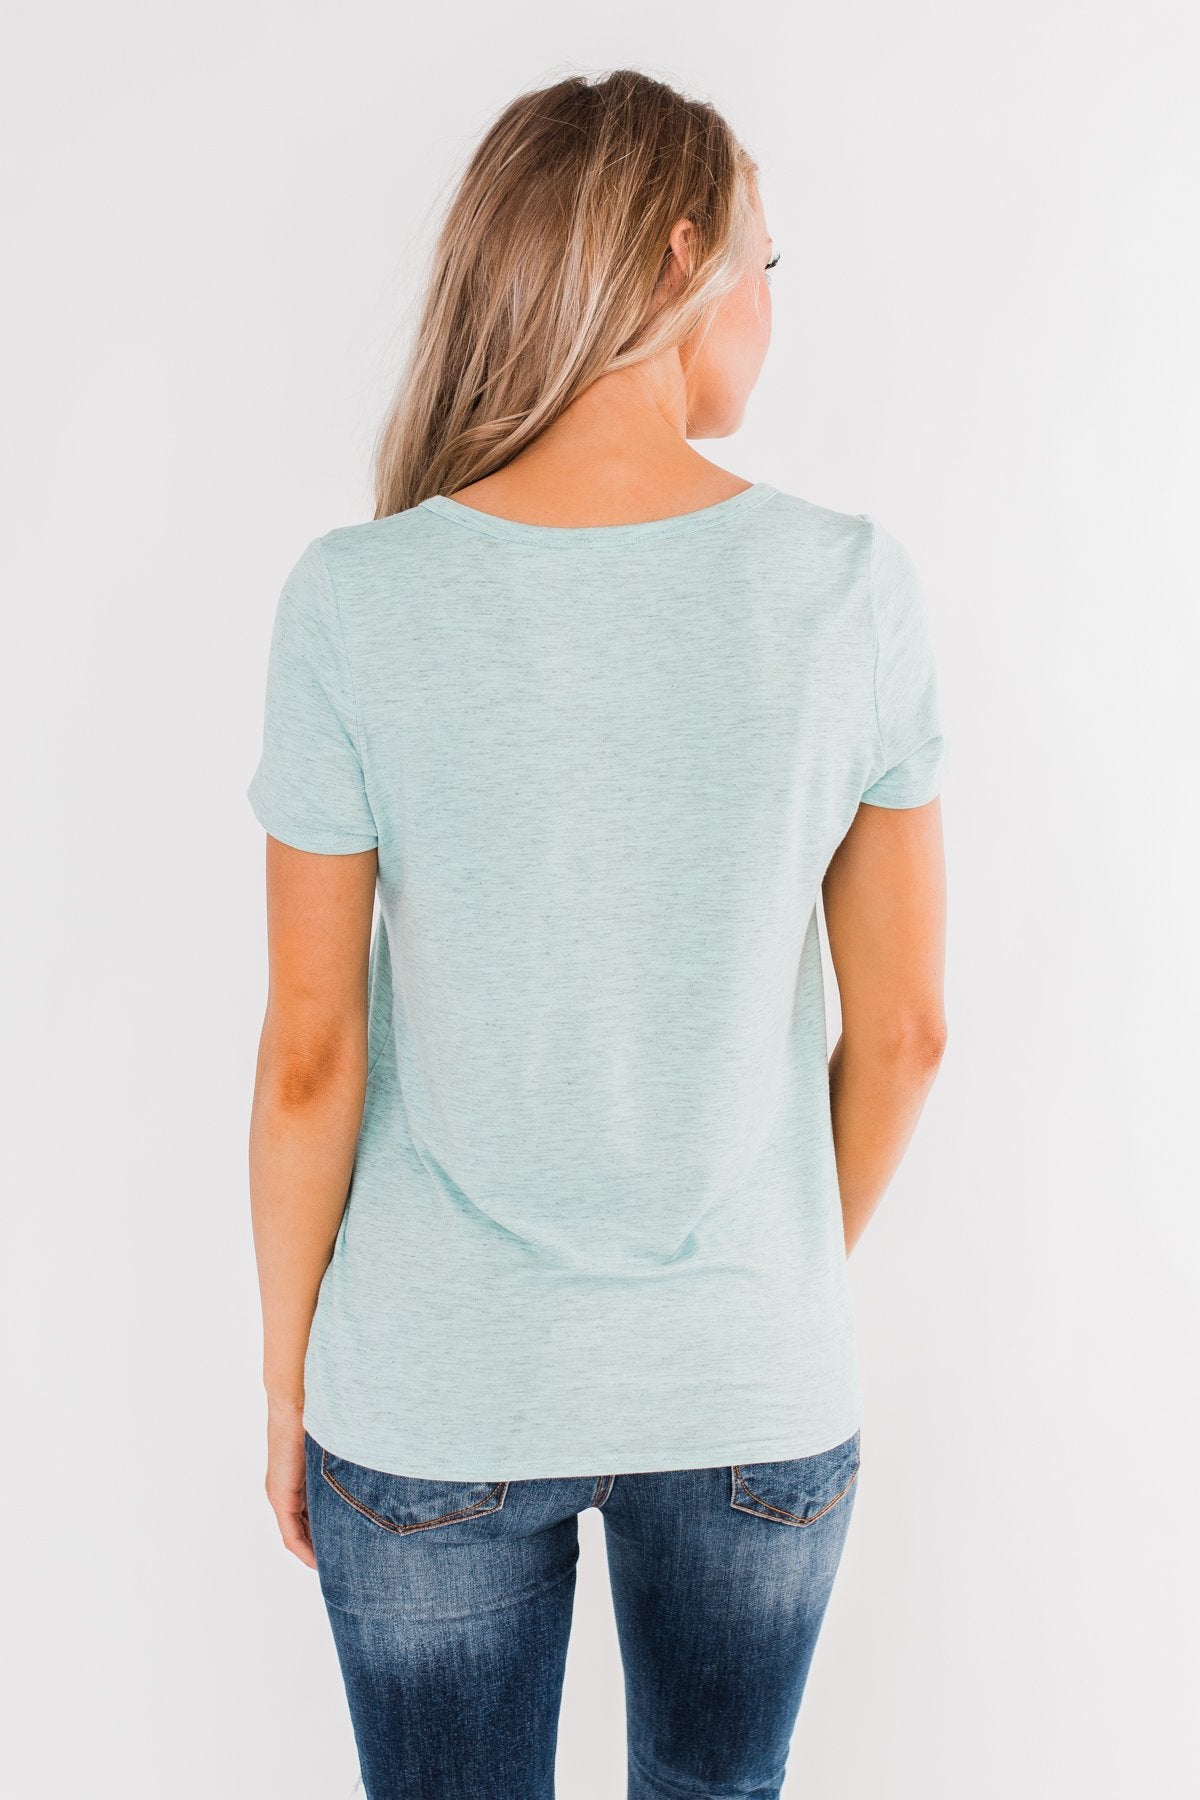 This is Me Notch Pocket Top- Heather Blue